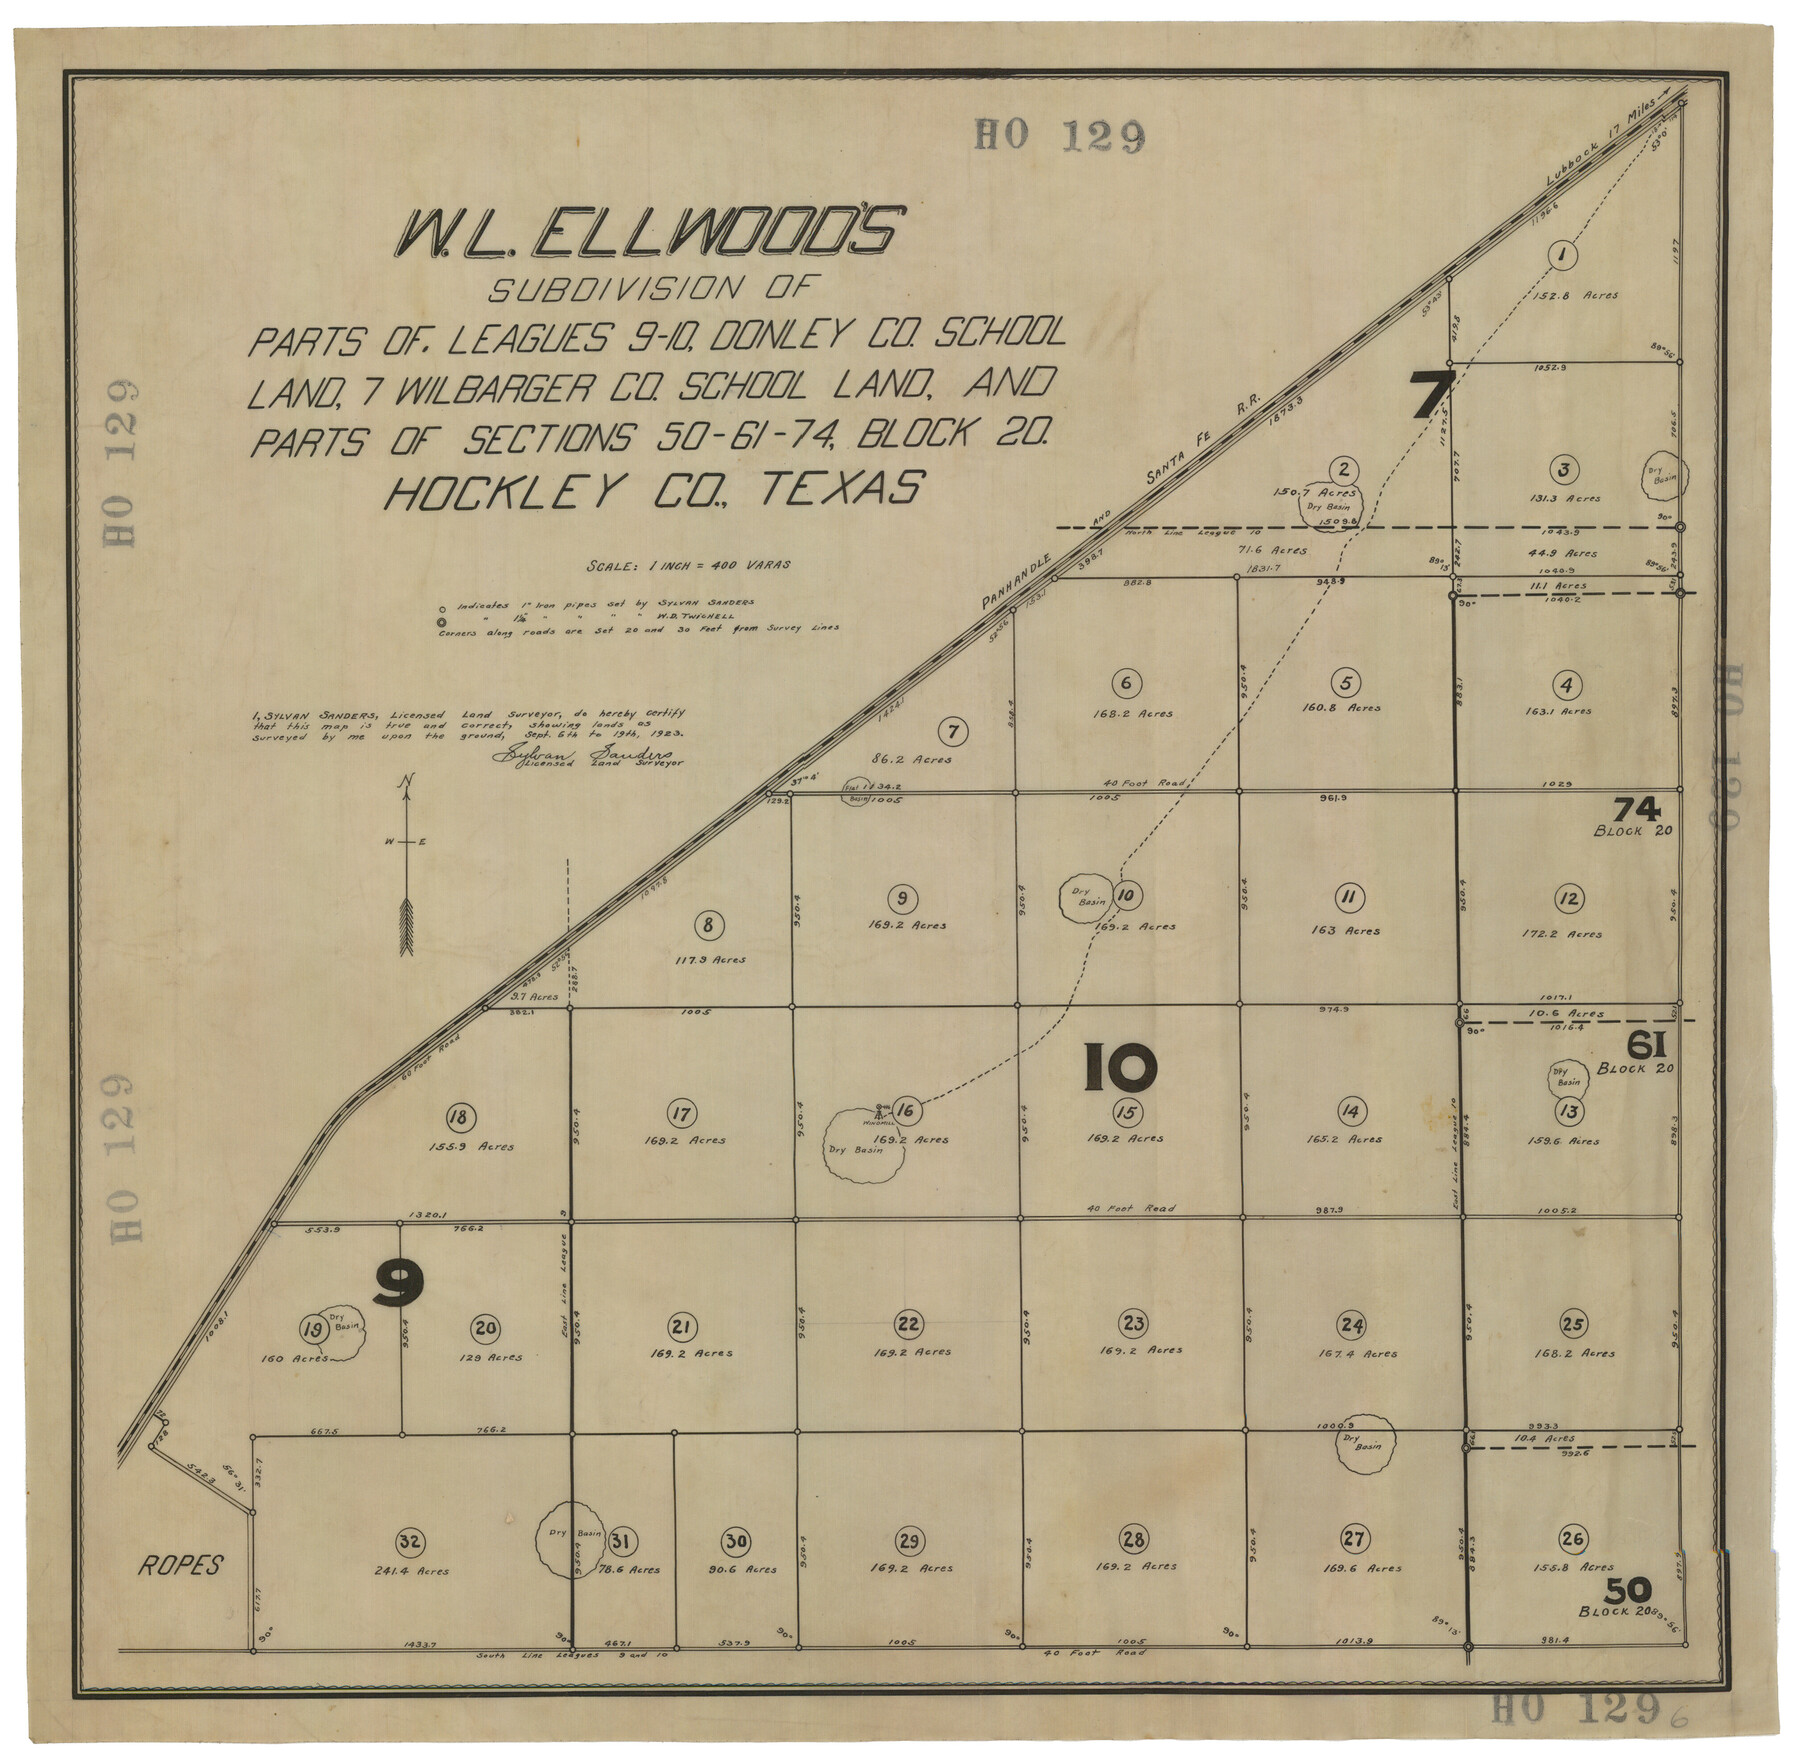 92249, W. L. Ellwood's Subdivision of Parts of Leagues 9 and 10, Donley County School Land, 7 Wilbarger County School Land and Parts of Section 50, 61, and 74, Block 20 Hockley County, Texas, Twichell Survey Records